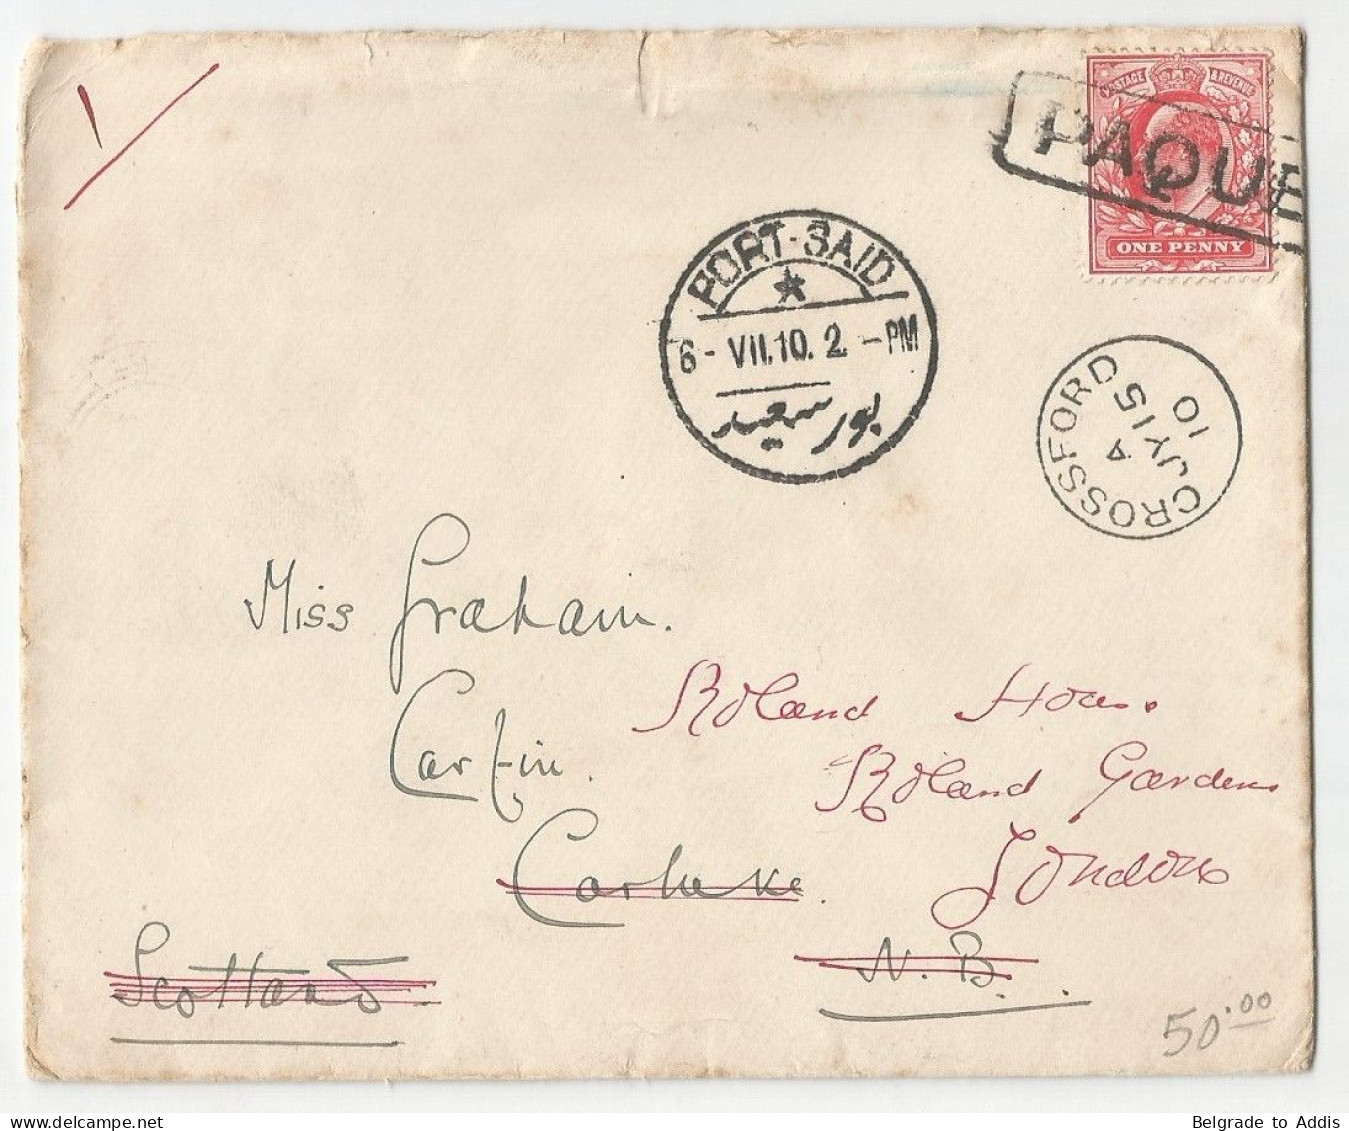 Egypt Great Britain EVII Cover Sent To Scotland Carluke Paquebot Port-Said 1910 Orient Line Steamers - 1866-1914 Khedivate Of Egypt